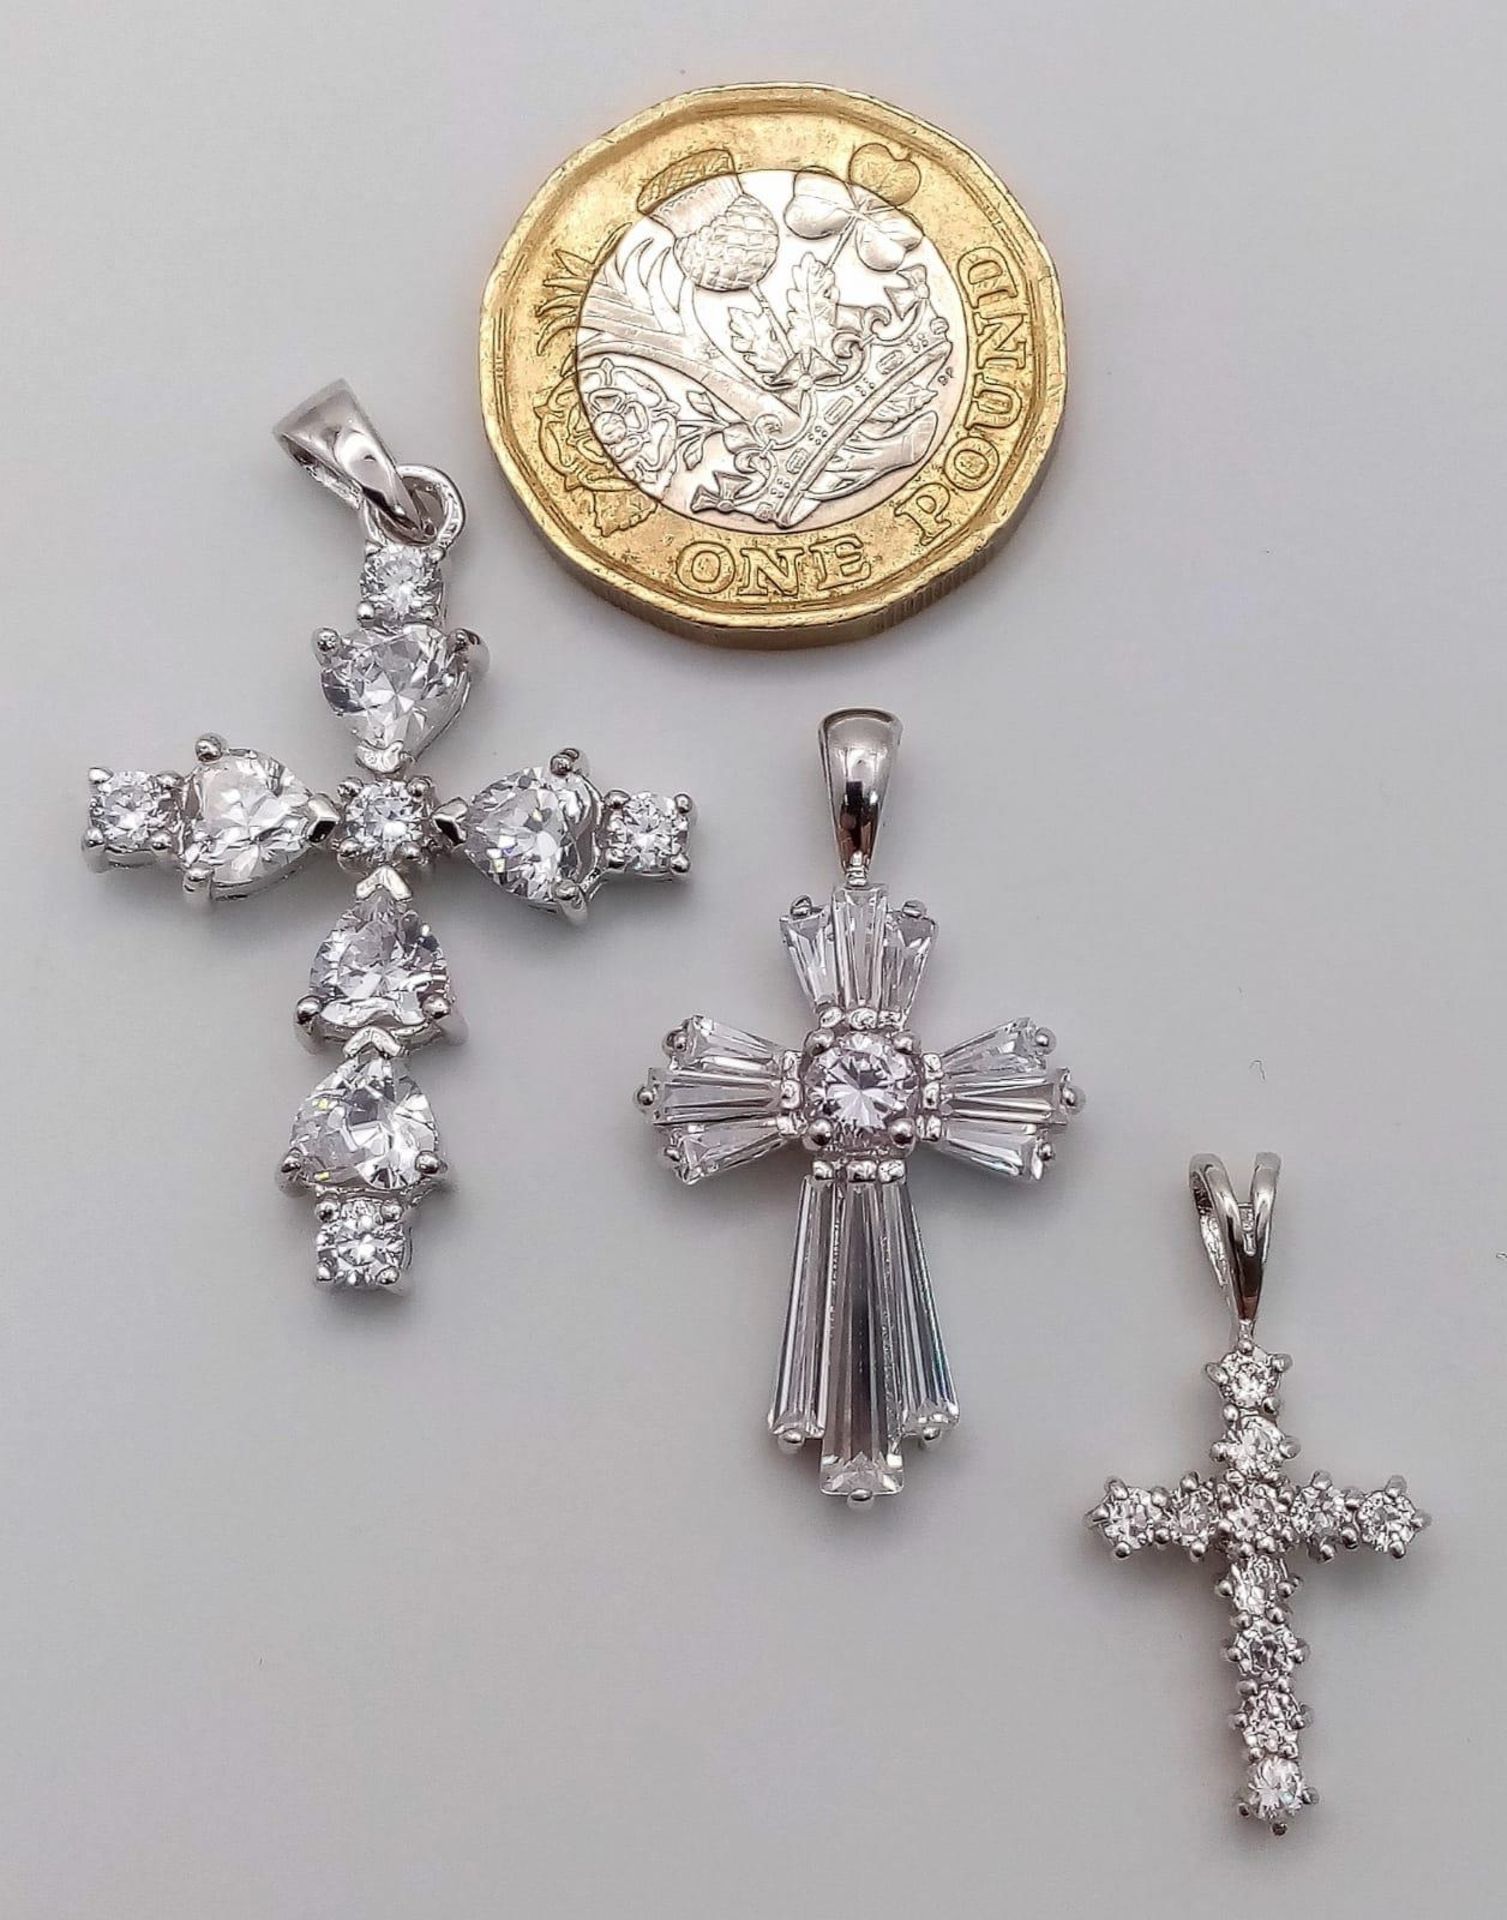 3 X STERLING SILVER STONE SET CROSSES PENDANTS, WEIGHT 8.1G, SEE PHOTOS FOR DETAILS - Image 6 of 6